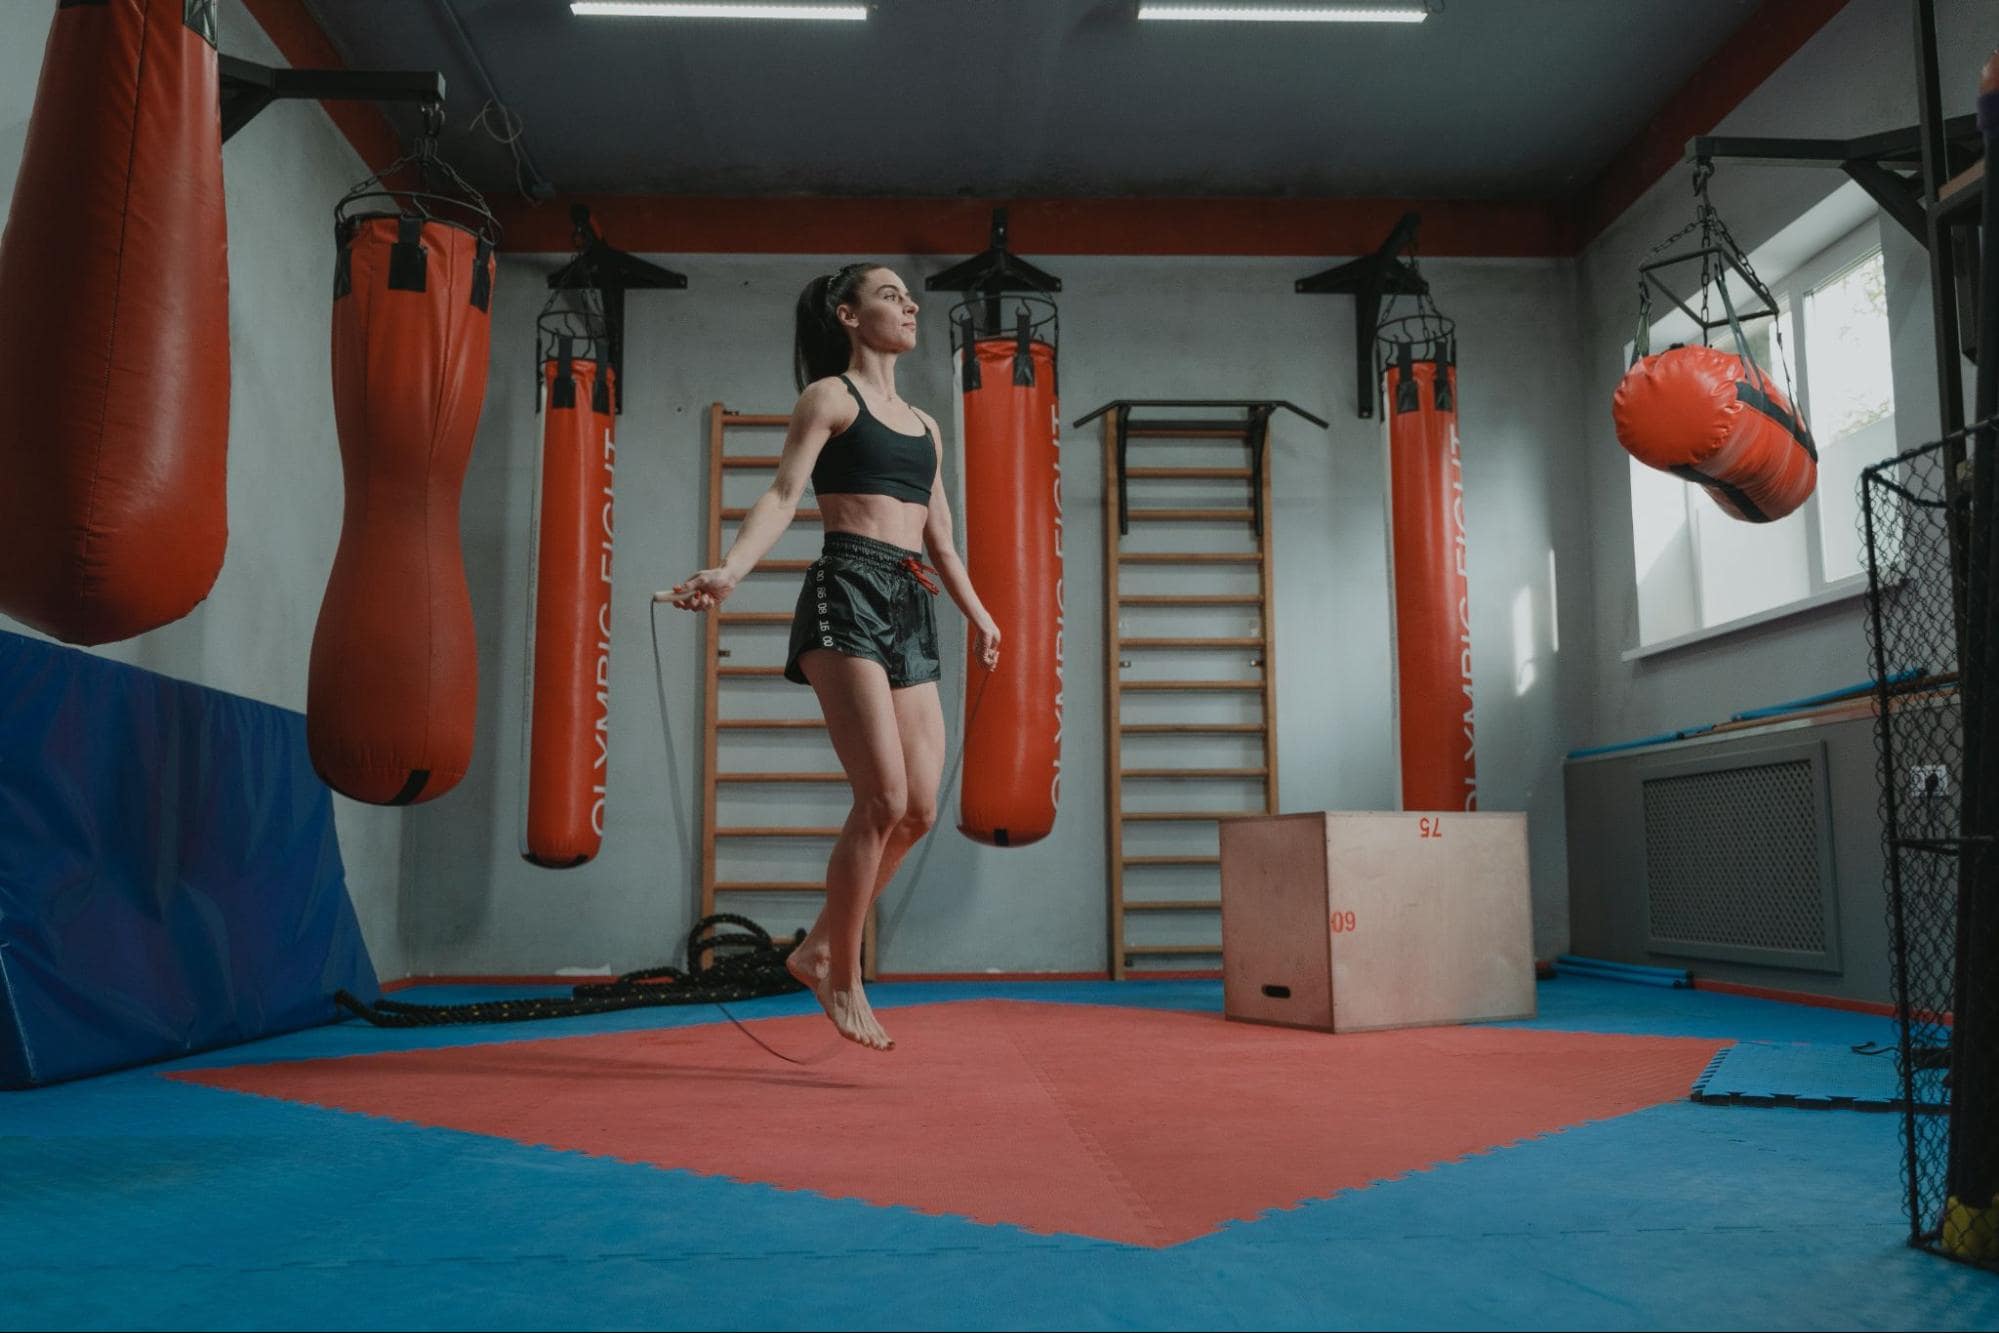 Person jump roping in a boxing ring